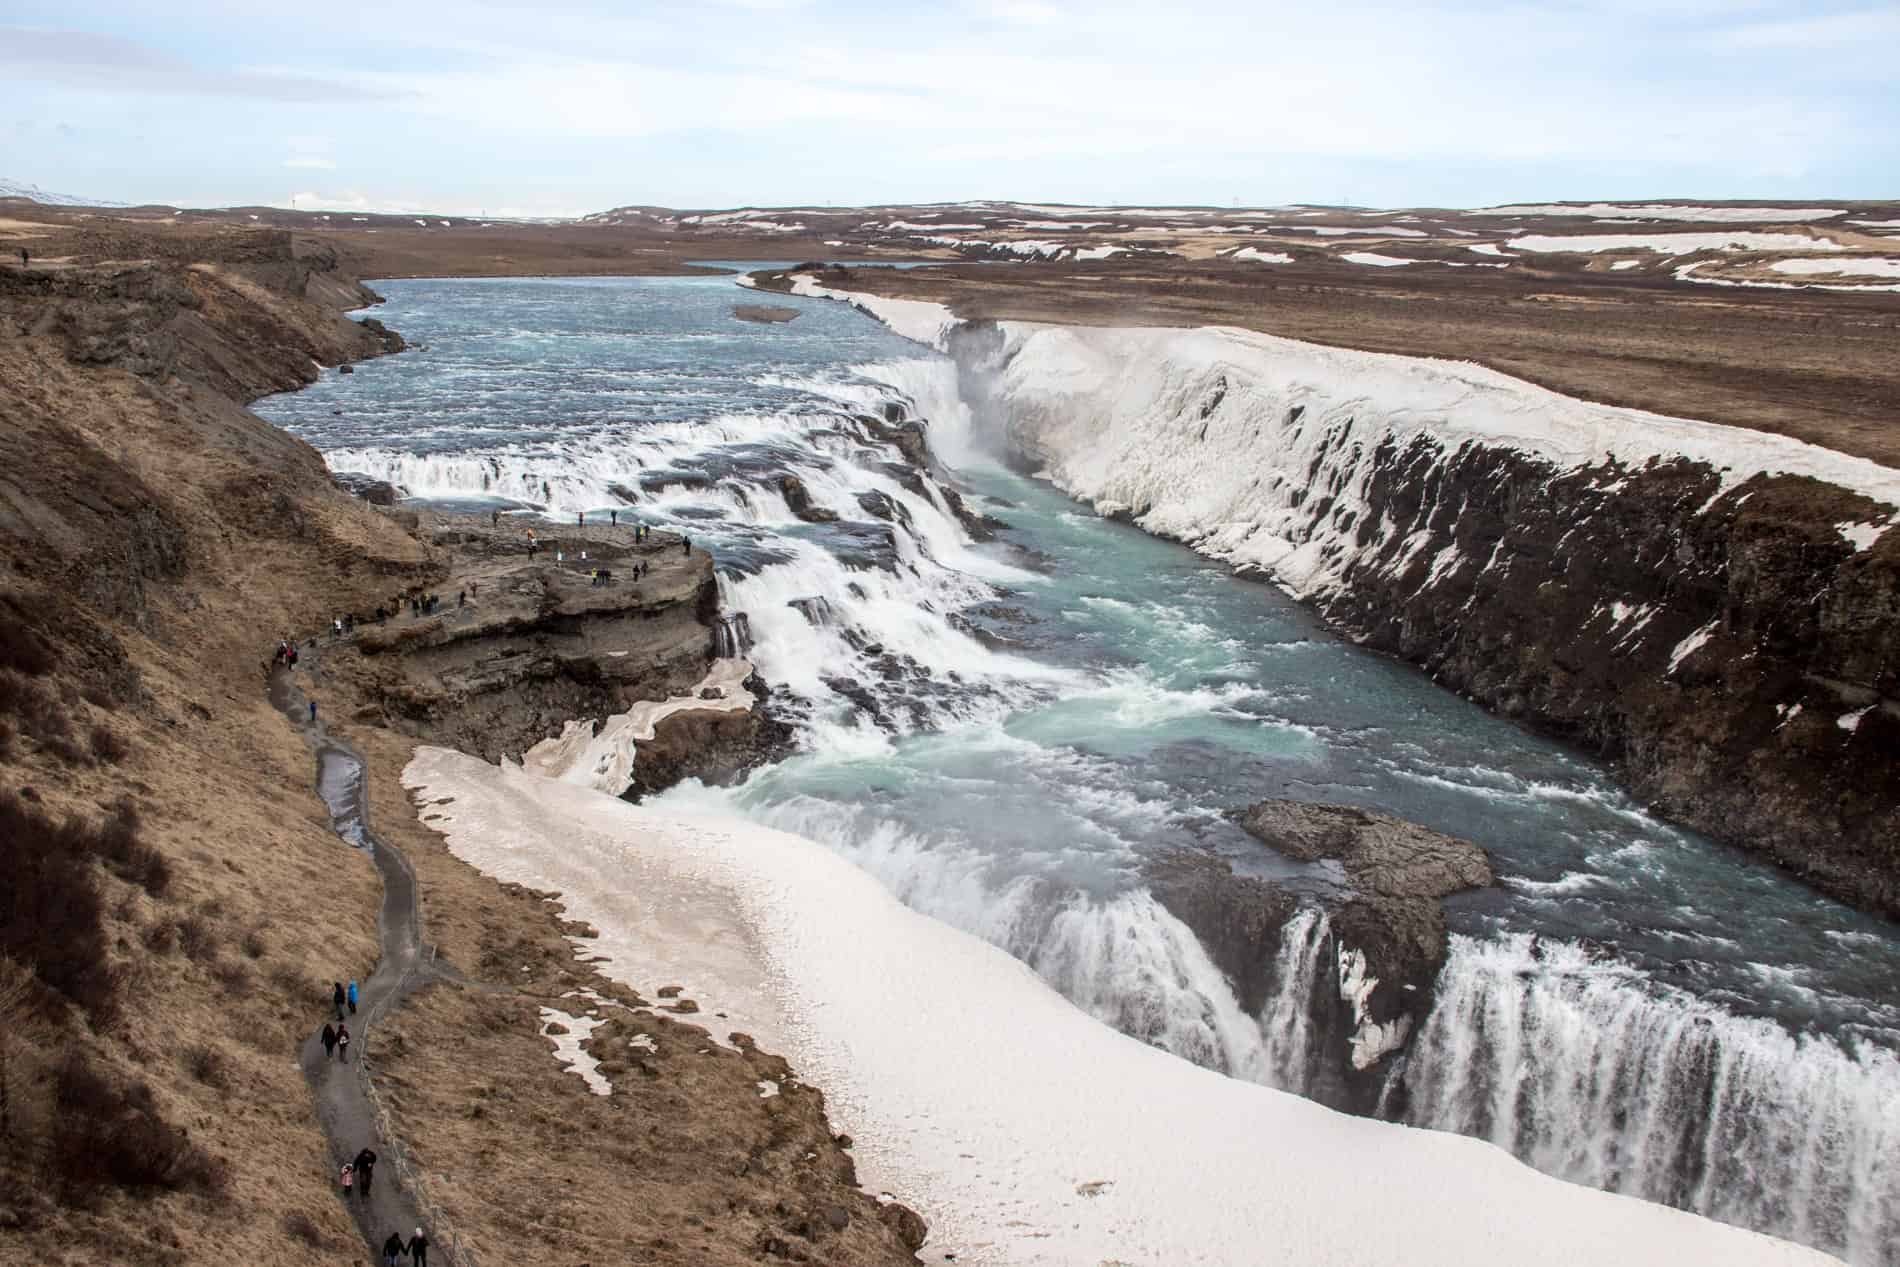 Elevated view of Gullfoss waterfall from a viewpoint overlooking the rock path walking trails next to the wild cascades. 